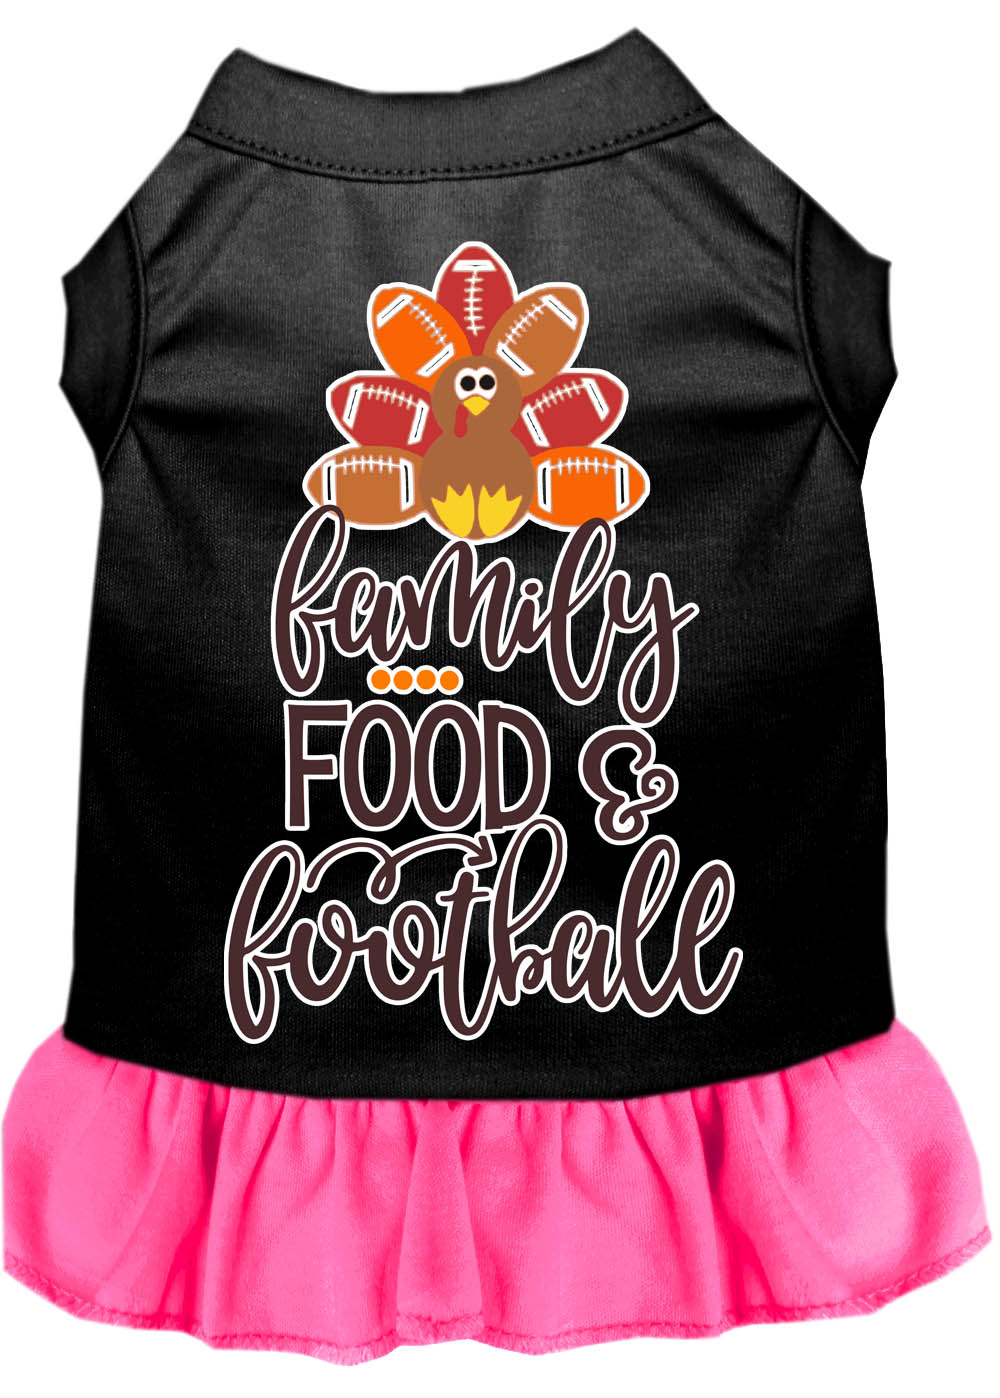 Family, Food, and Football Screen Print Dog Dress Black with Bright Pink Lg